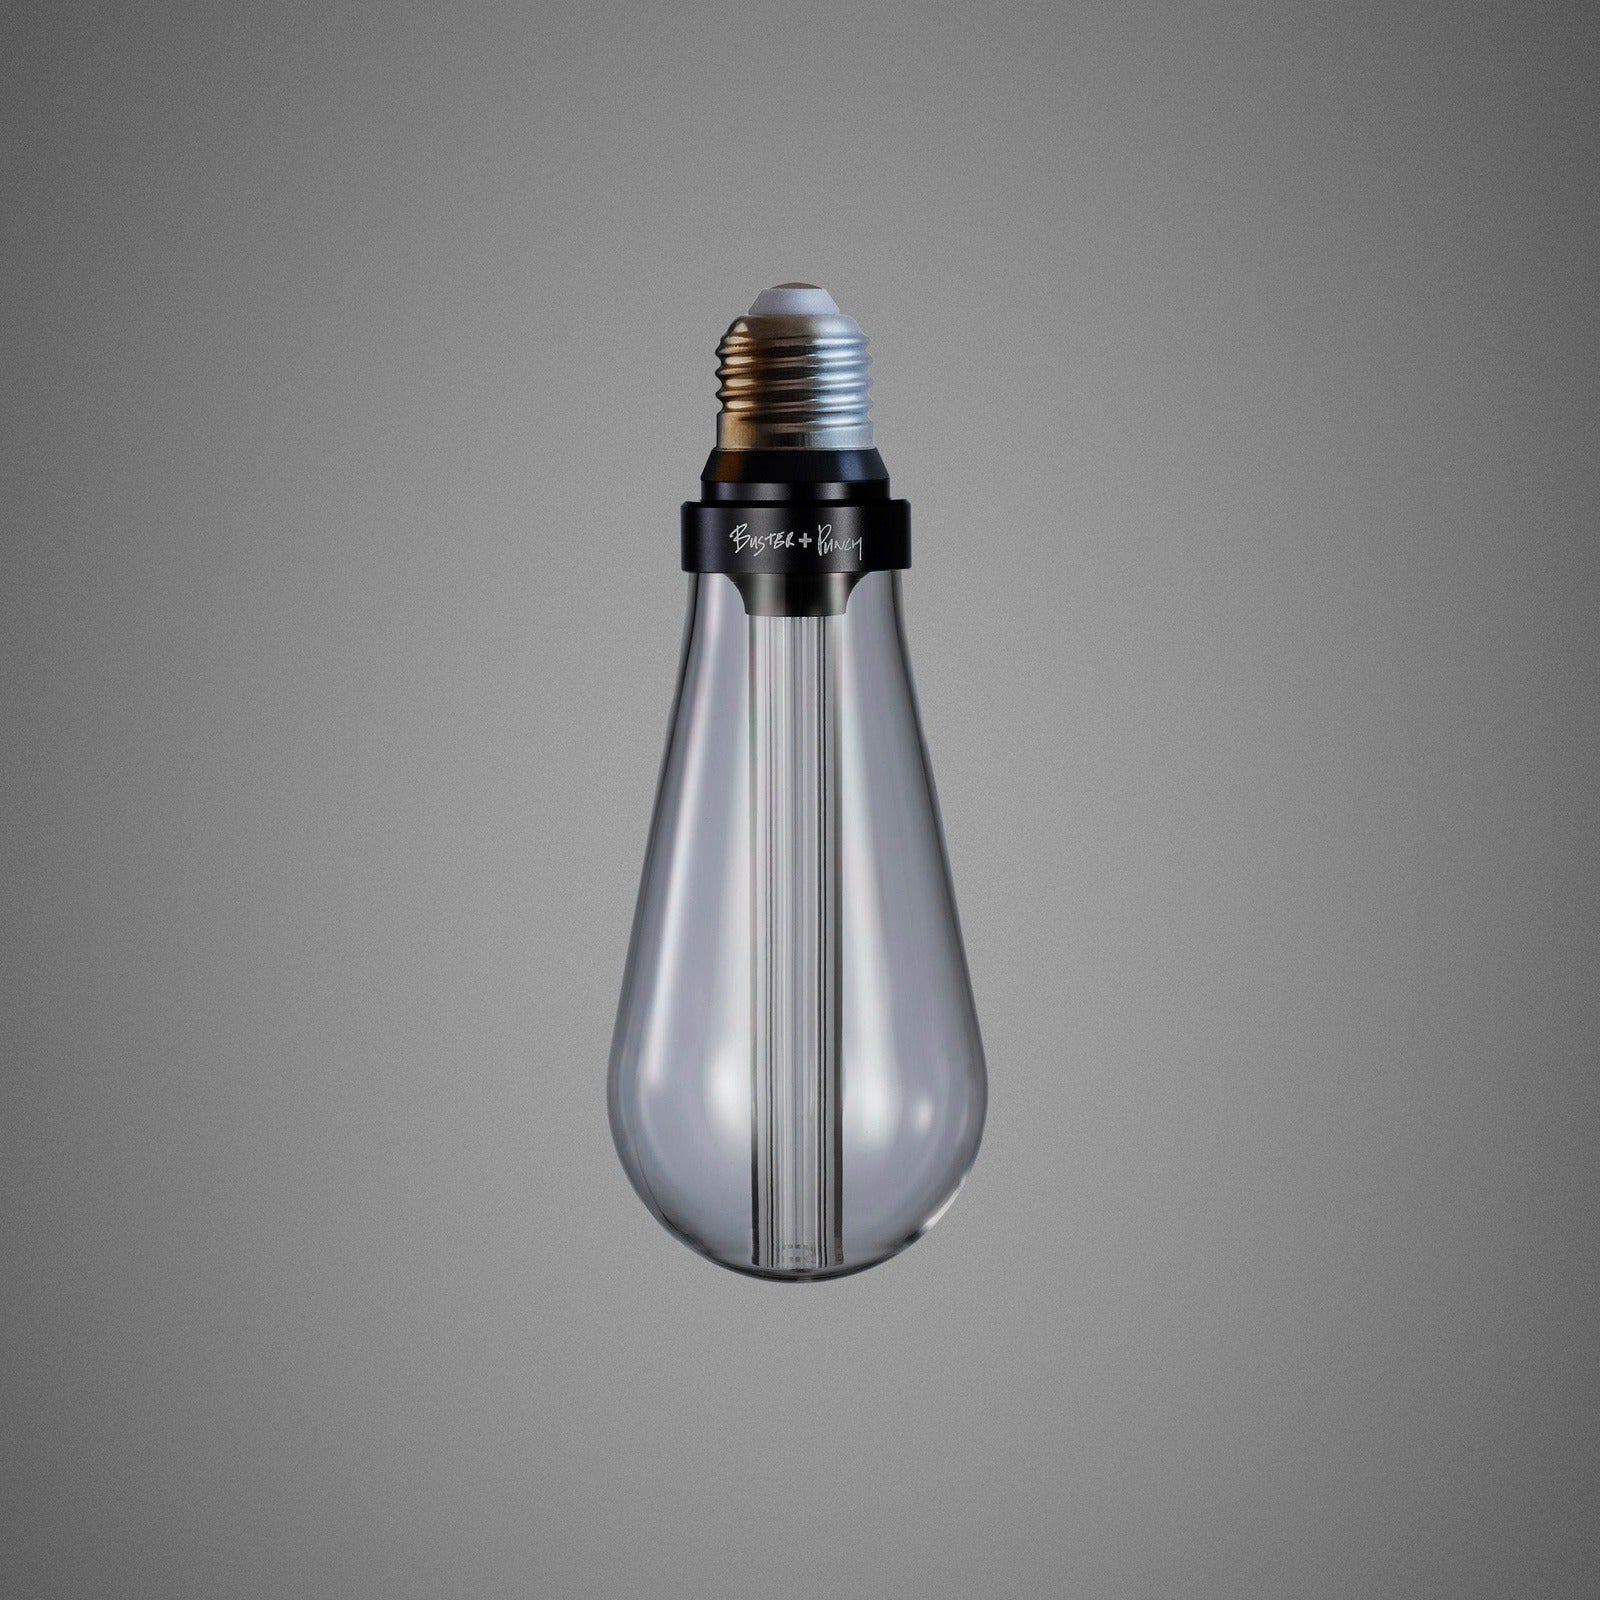 Buster Bulb - Crystal E27 Non-Dimmable - KOOT